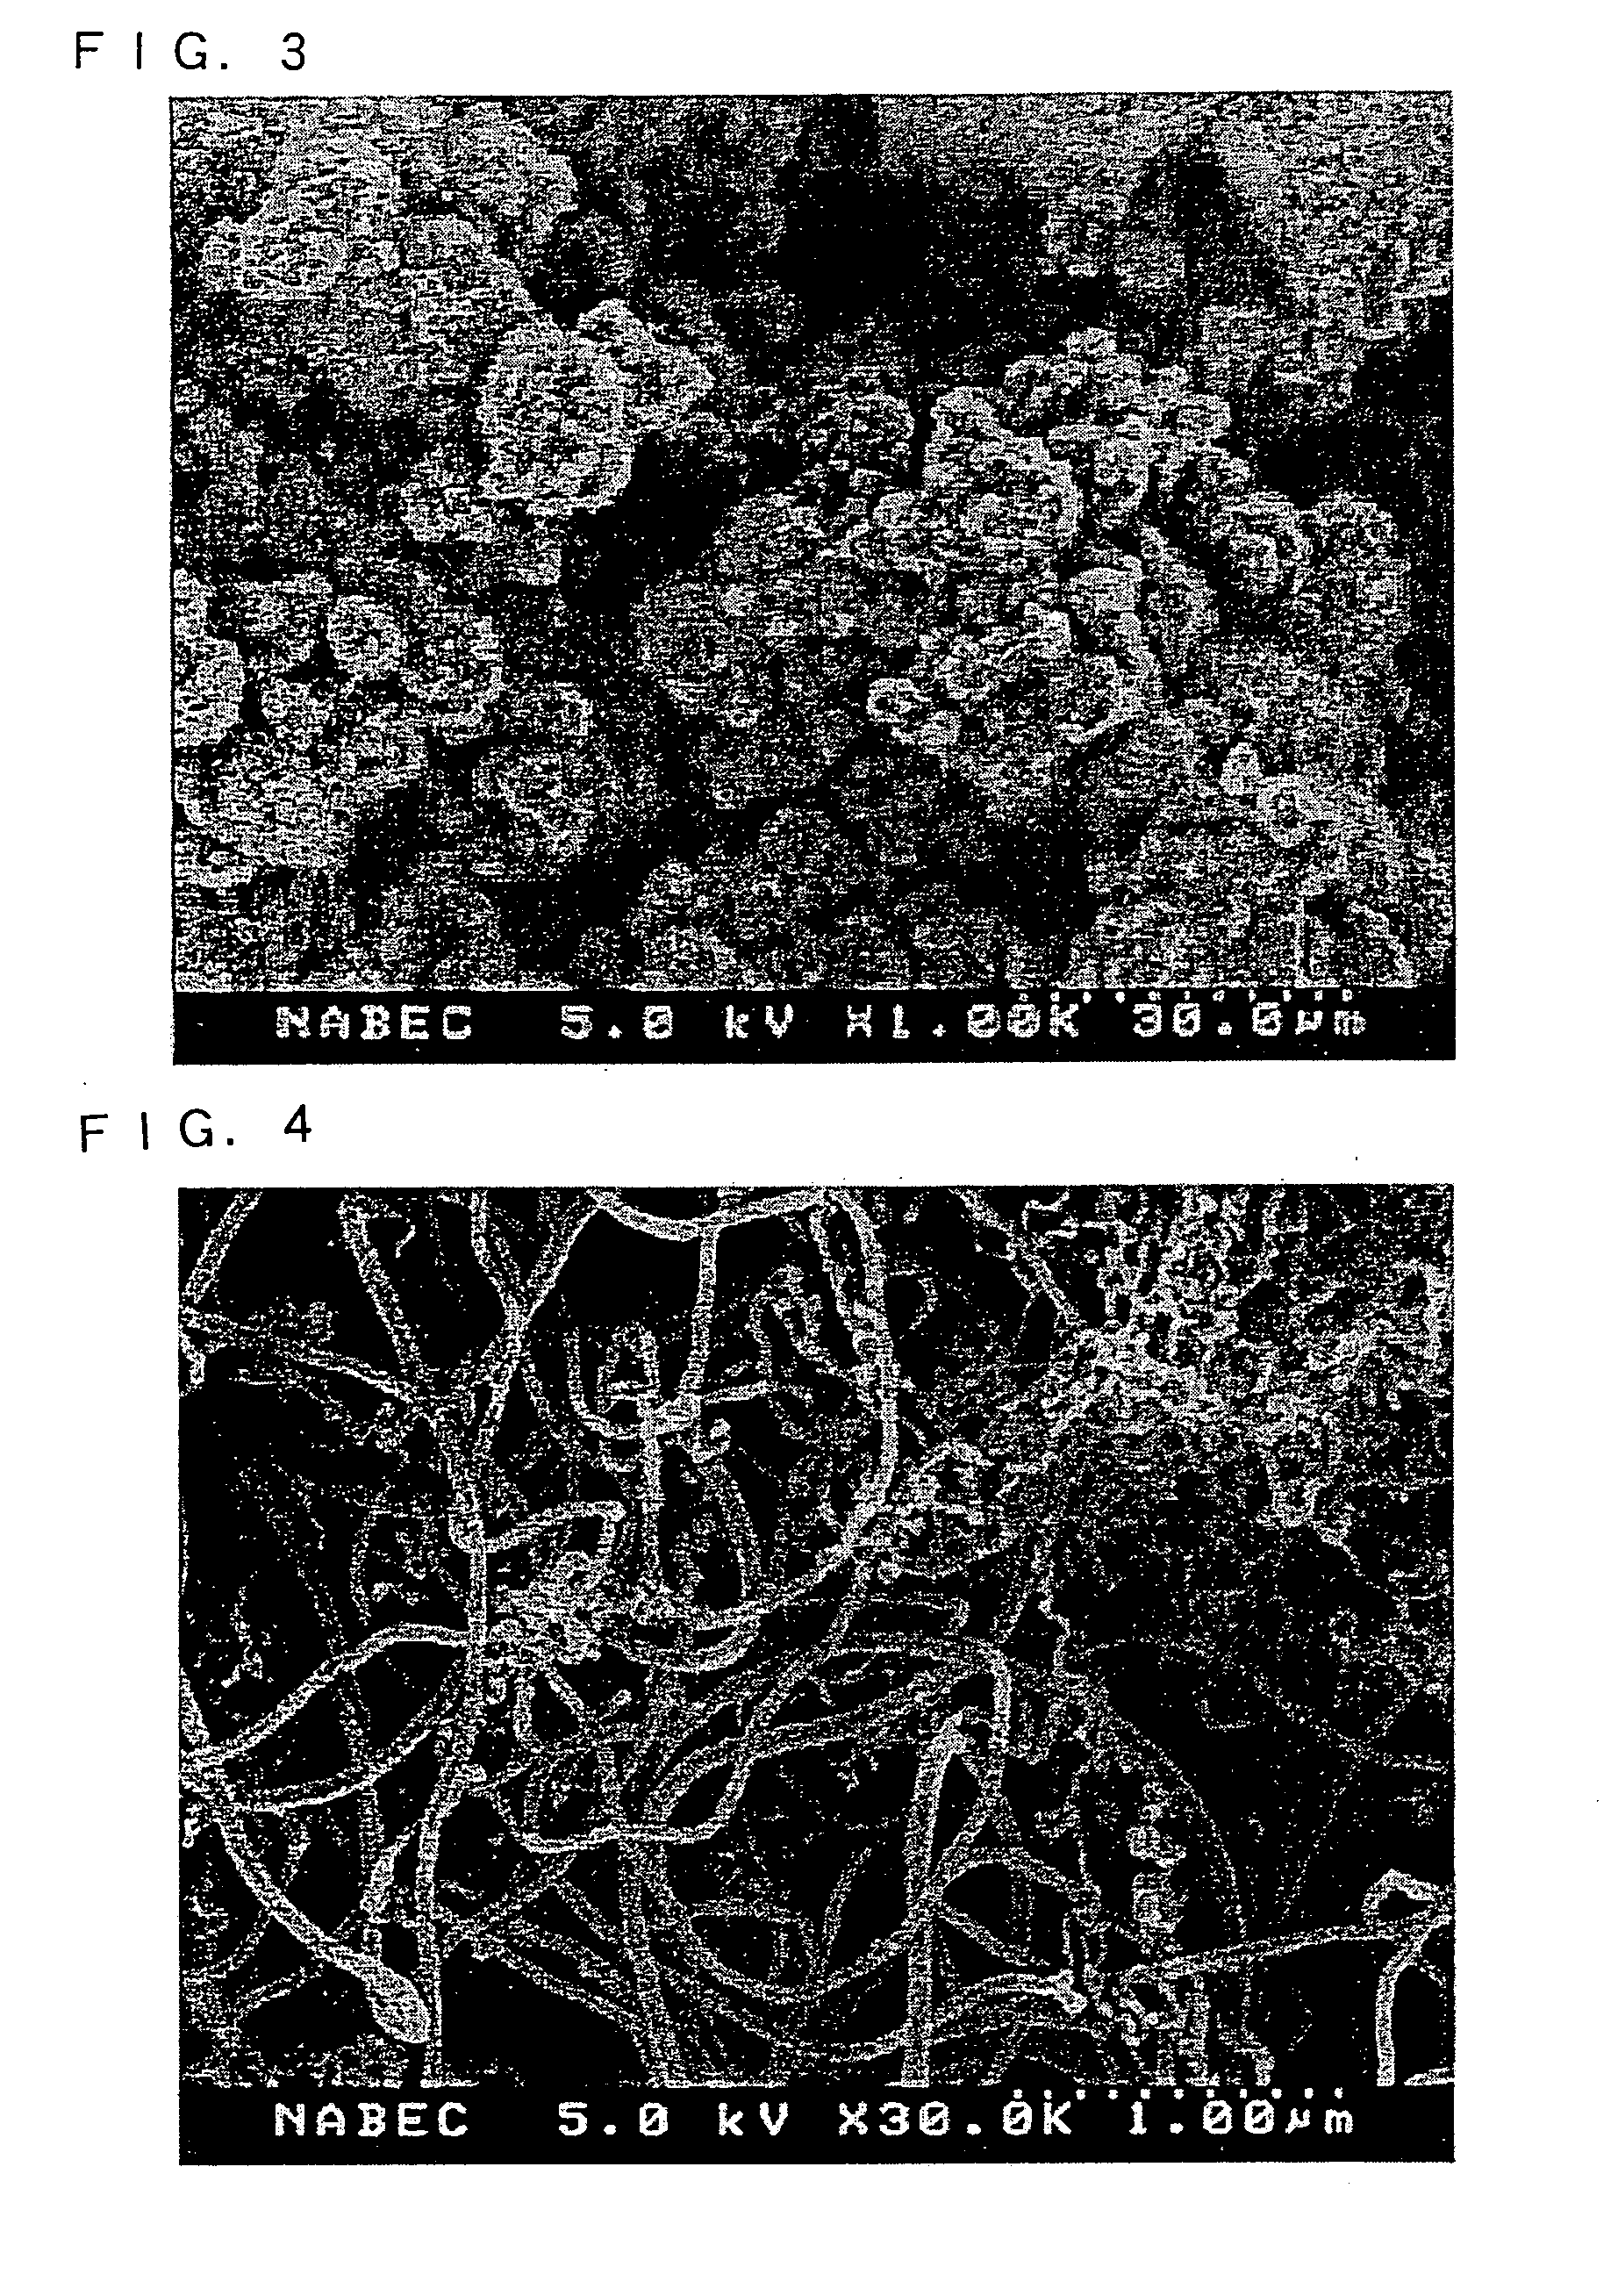 Composite Negative Electrode Active Material, Method For Producing The Same And Non-Aqueous Electrolyte Secondary Battery